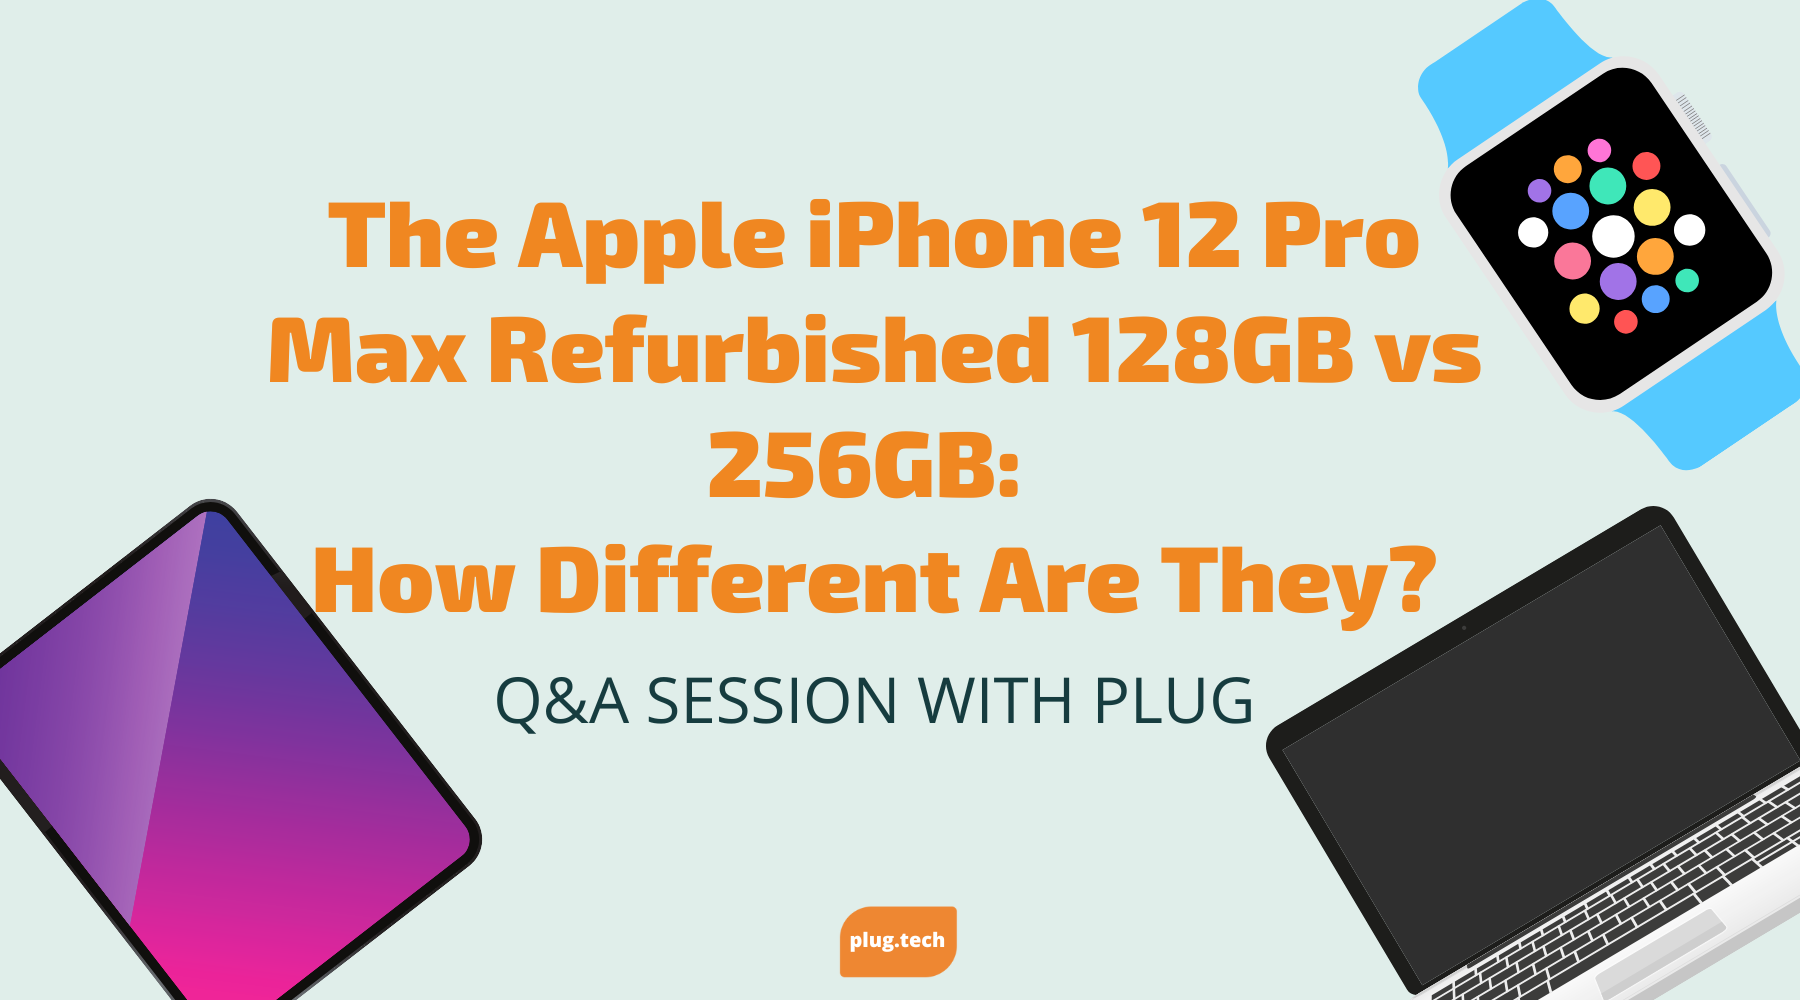 The Apple iPhone 12 Pro Max Refurbished 128GB vs 256GB: How Different